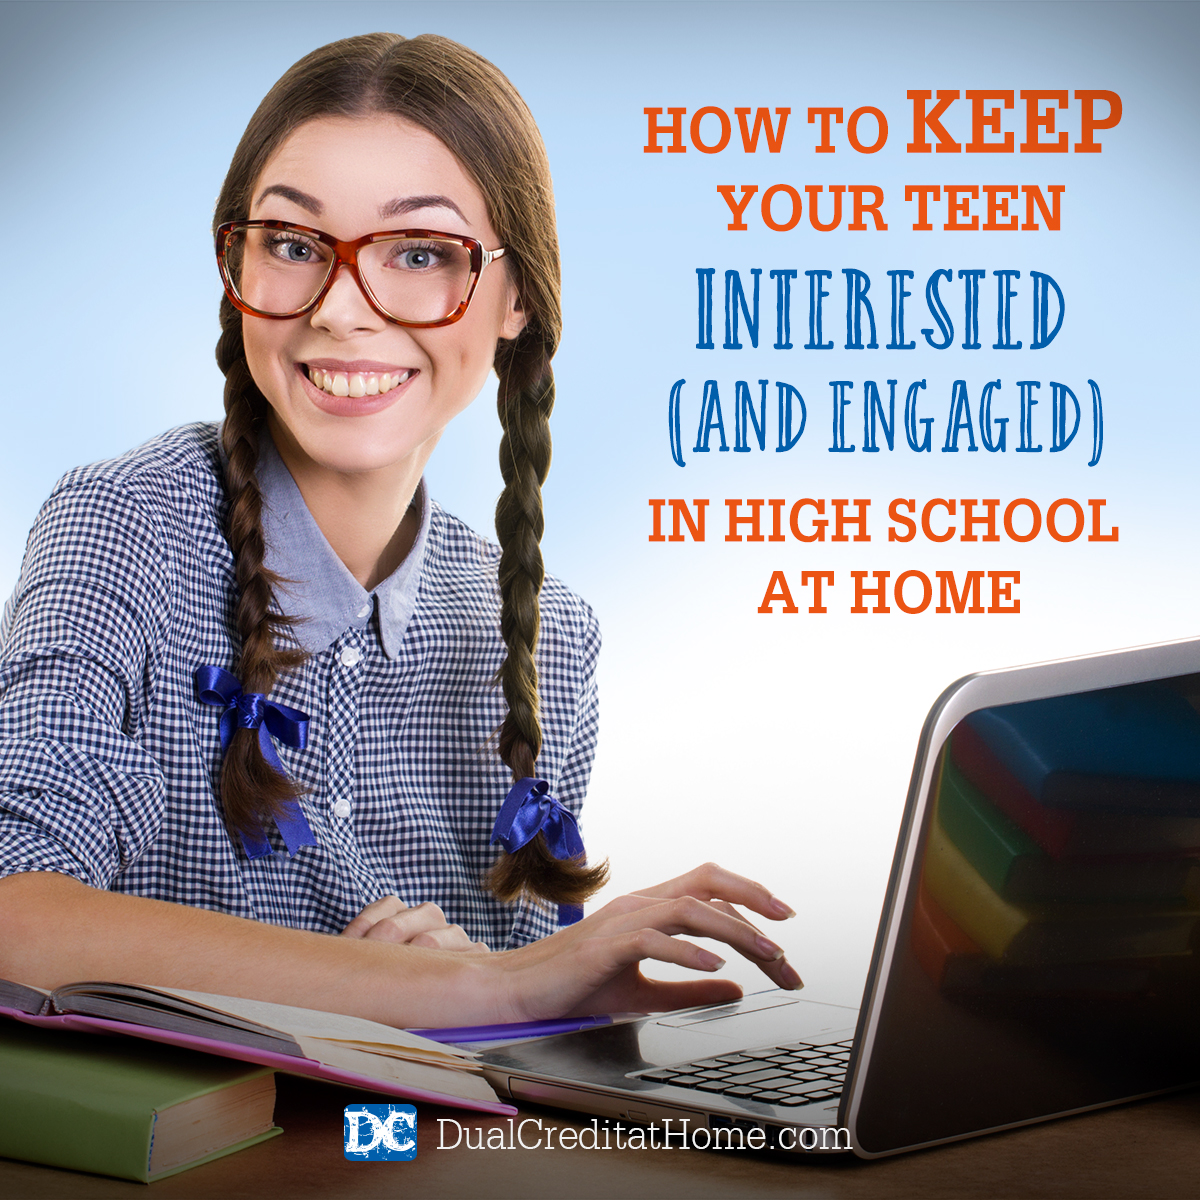 How to Keep Your Teen Interested (and Engaged) in High School at Home